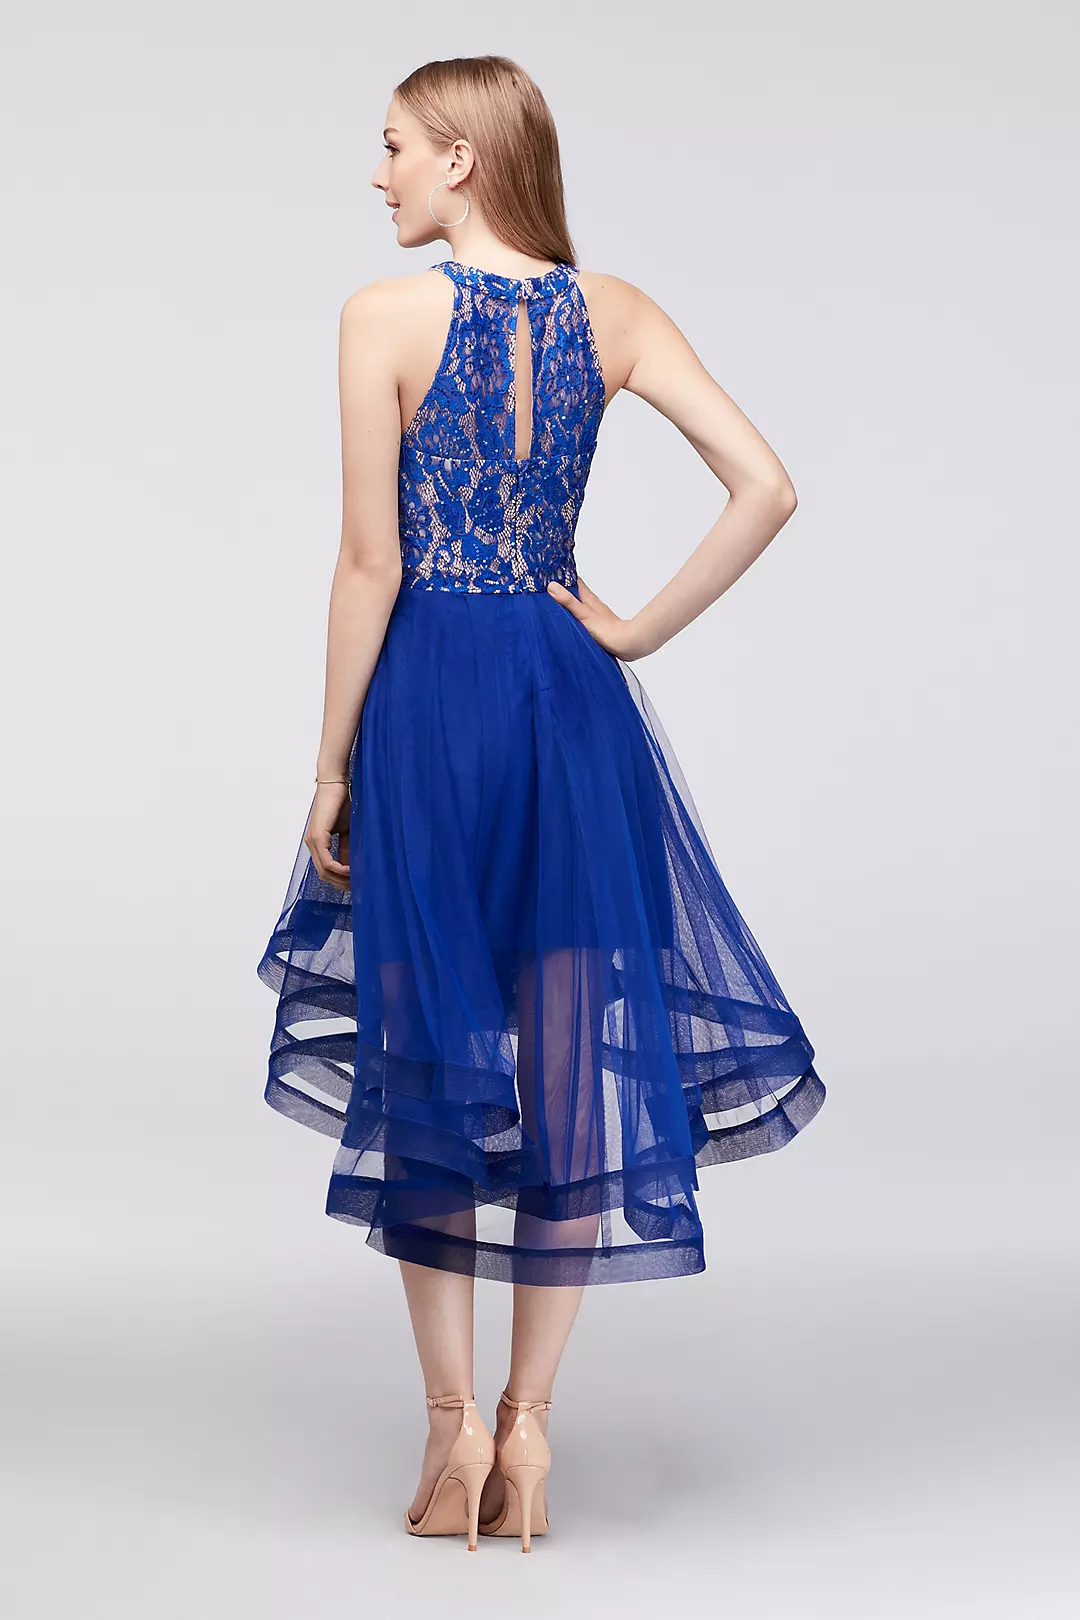 Sequin Lace Dress with Ruffled High-Low Skirt Image 2